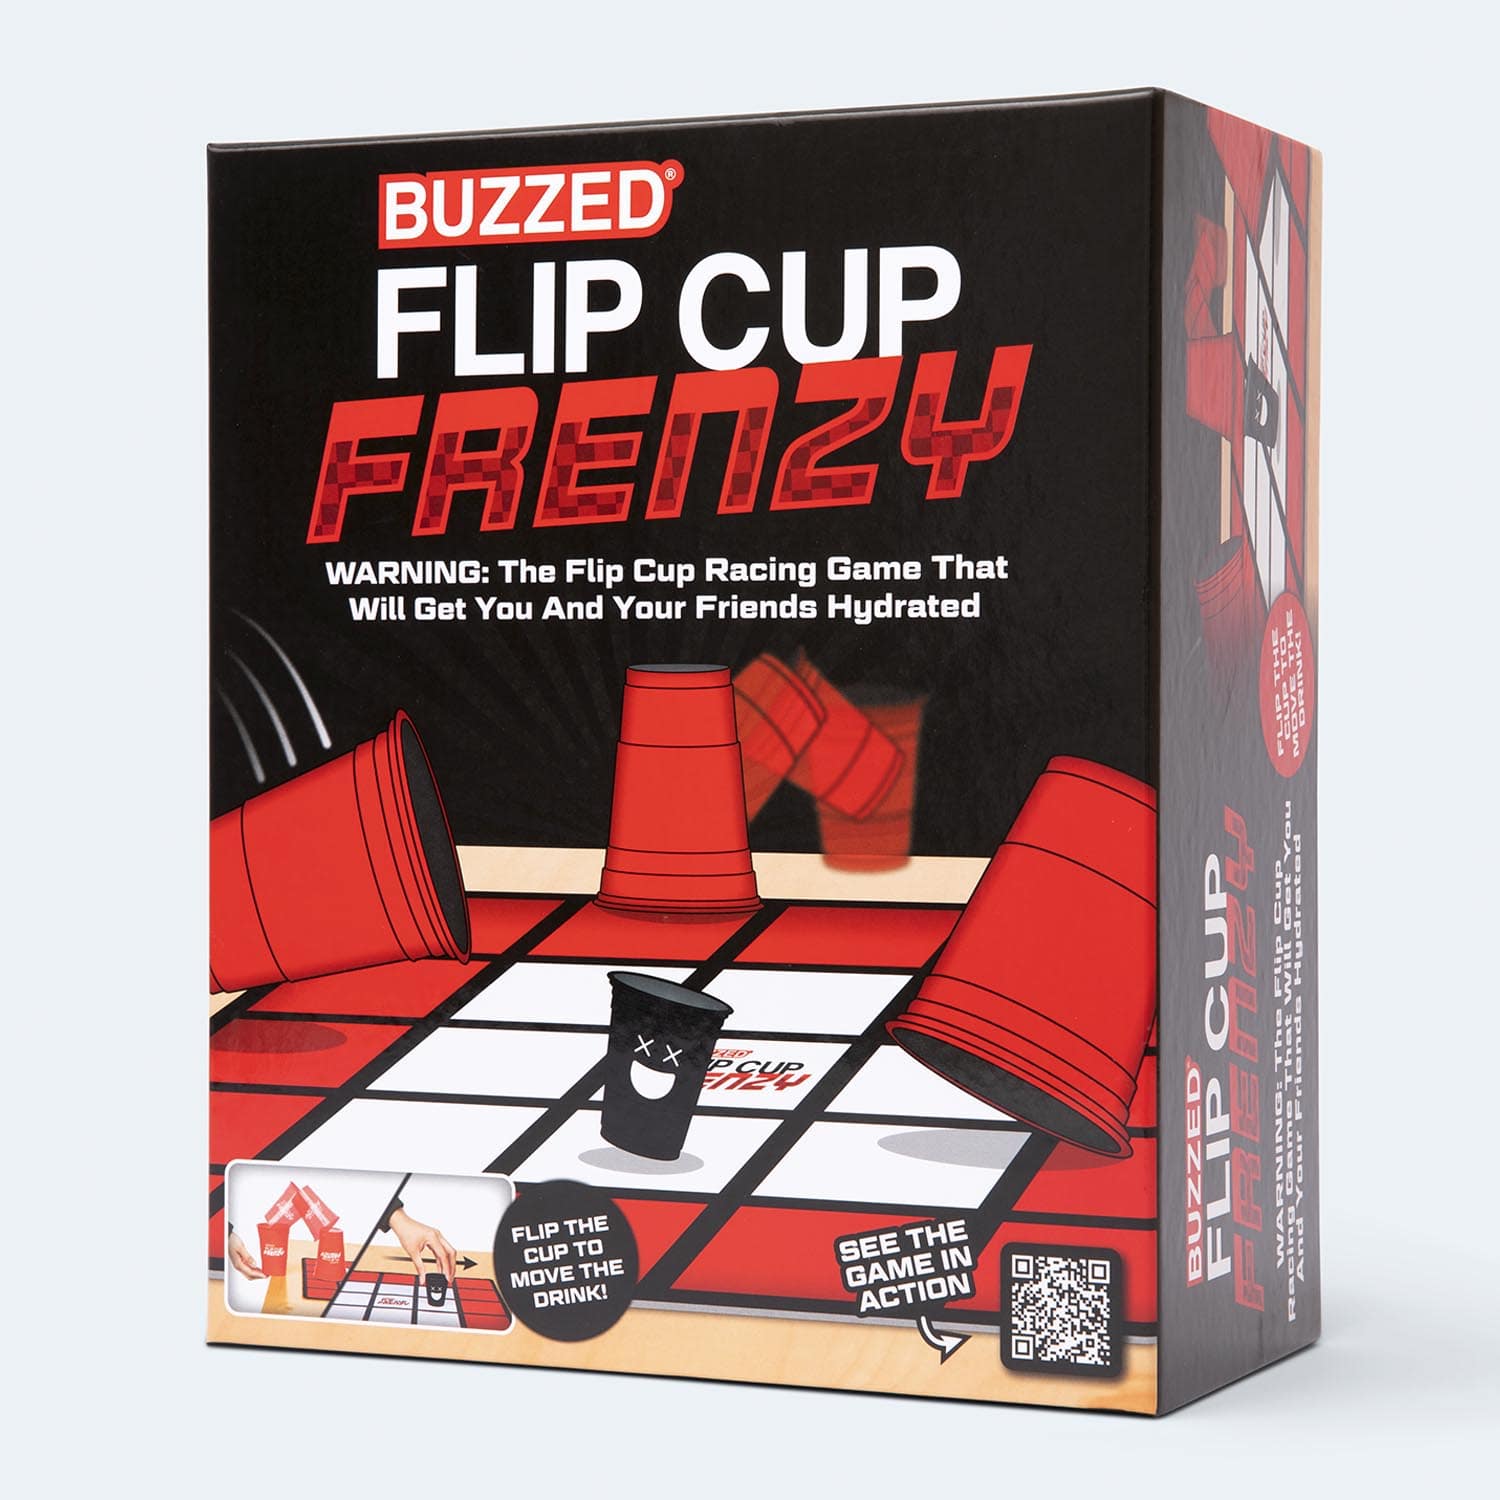 buzzed-flip-cup-frenzy-game-box-and-game-play-02-what-do-you-meme-by-relatable